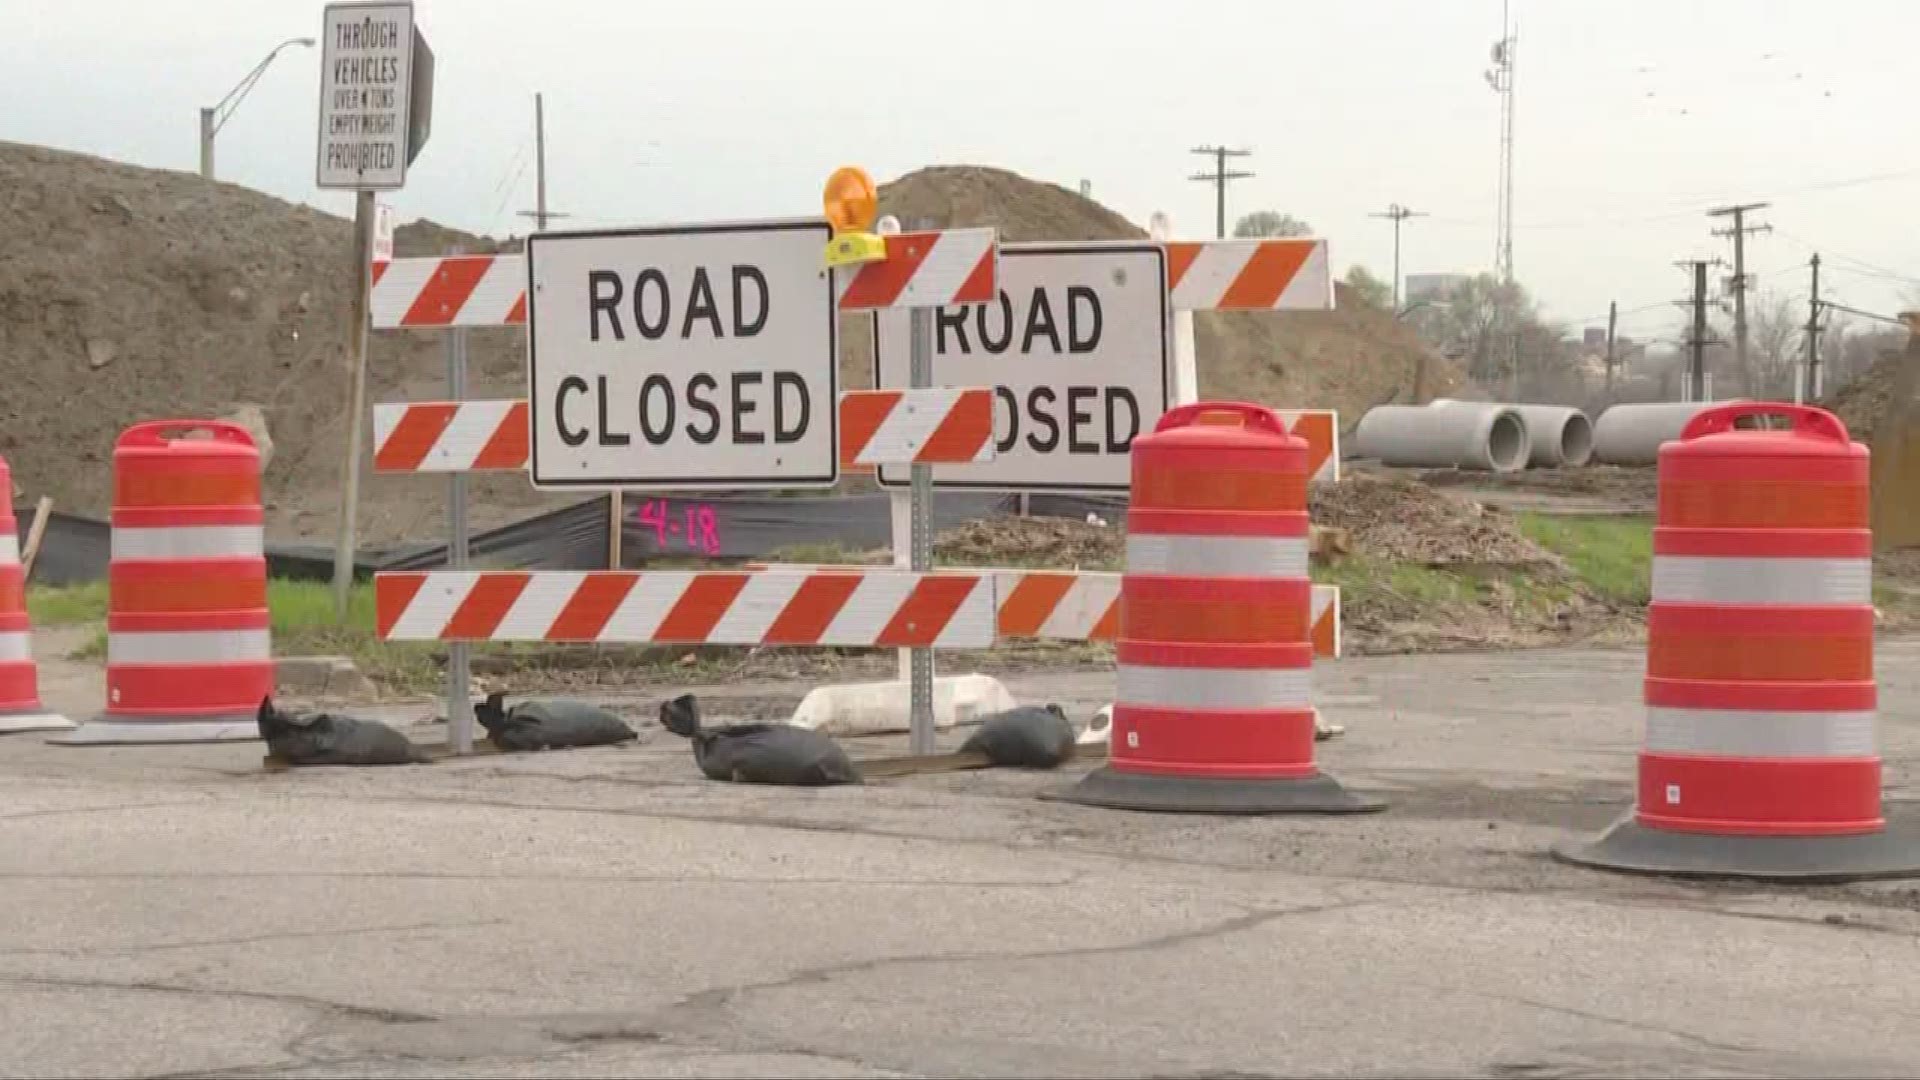 May 2019: It's a project that will change Cleveland traffic for the next two years as crews close I-490 between E. 55th Street and I-77 later this month. Our own 'road warrior,' Danielle Wiggins, has a guide to the detours.